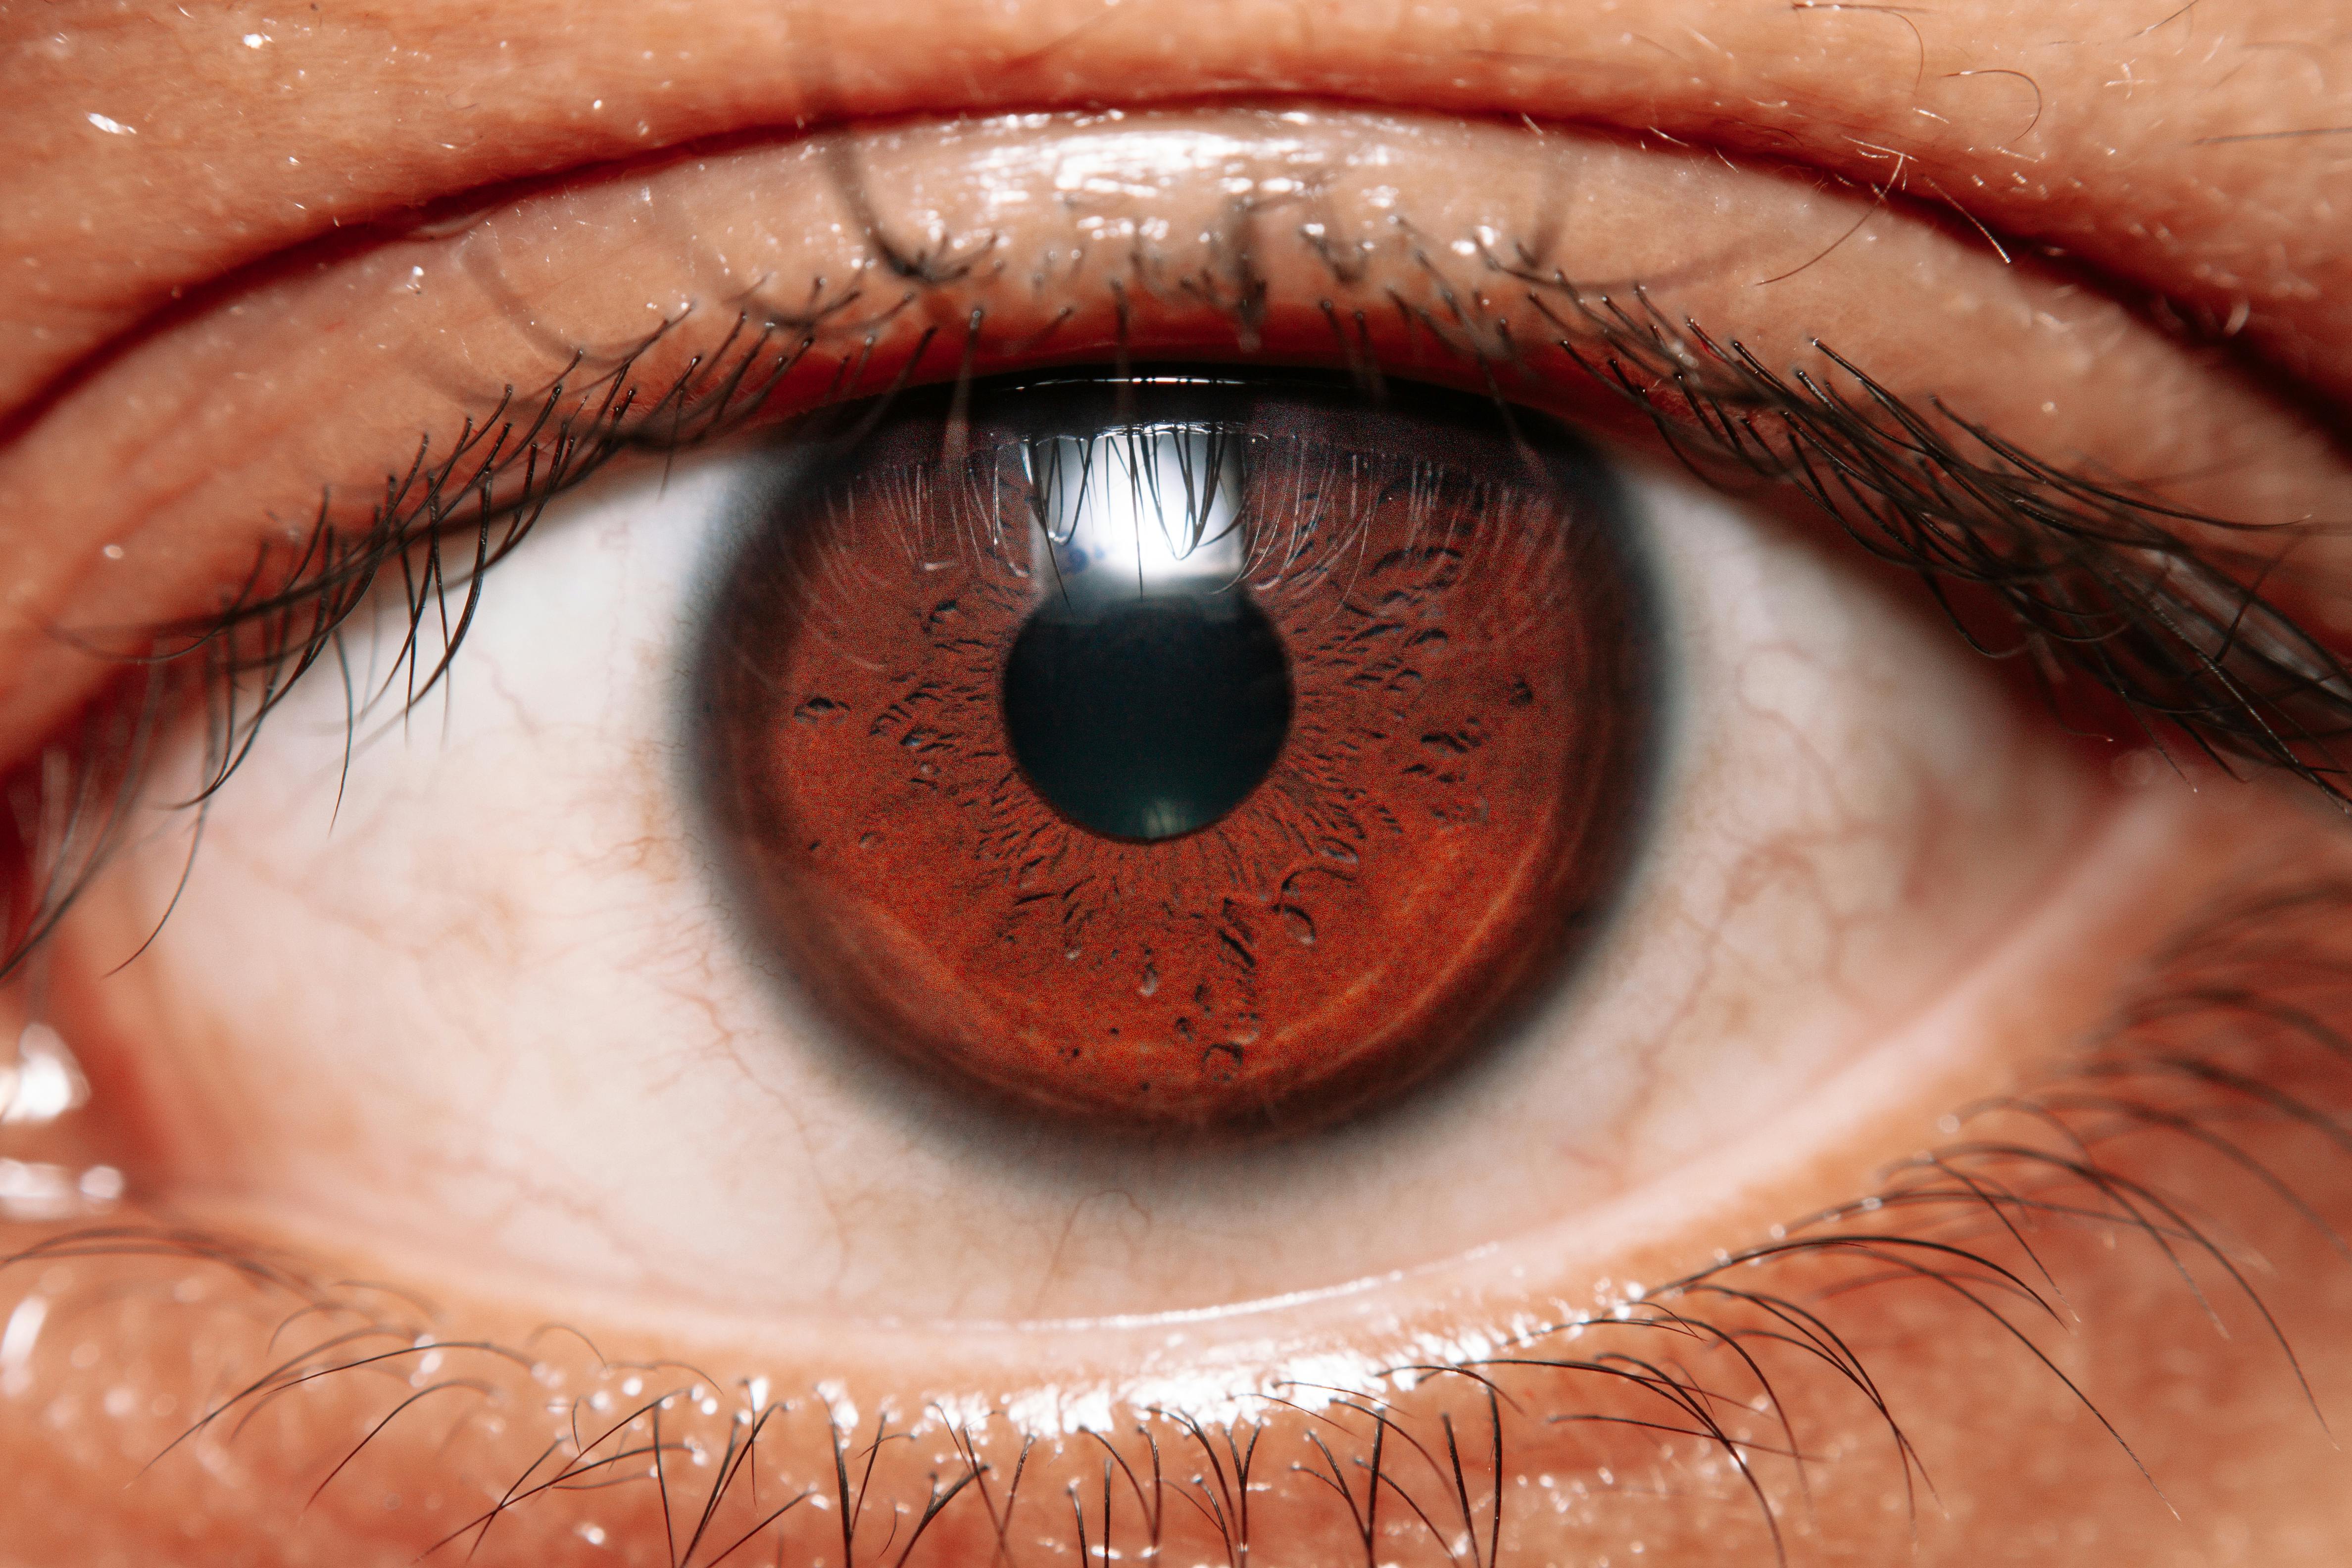 Close-Up Photo Of Person's Eye · Free Stock Photo